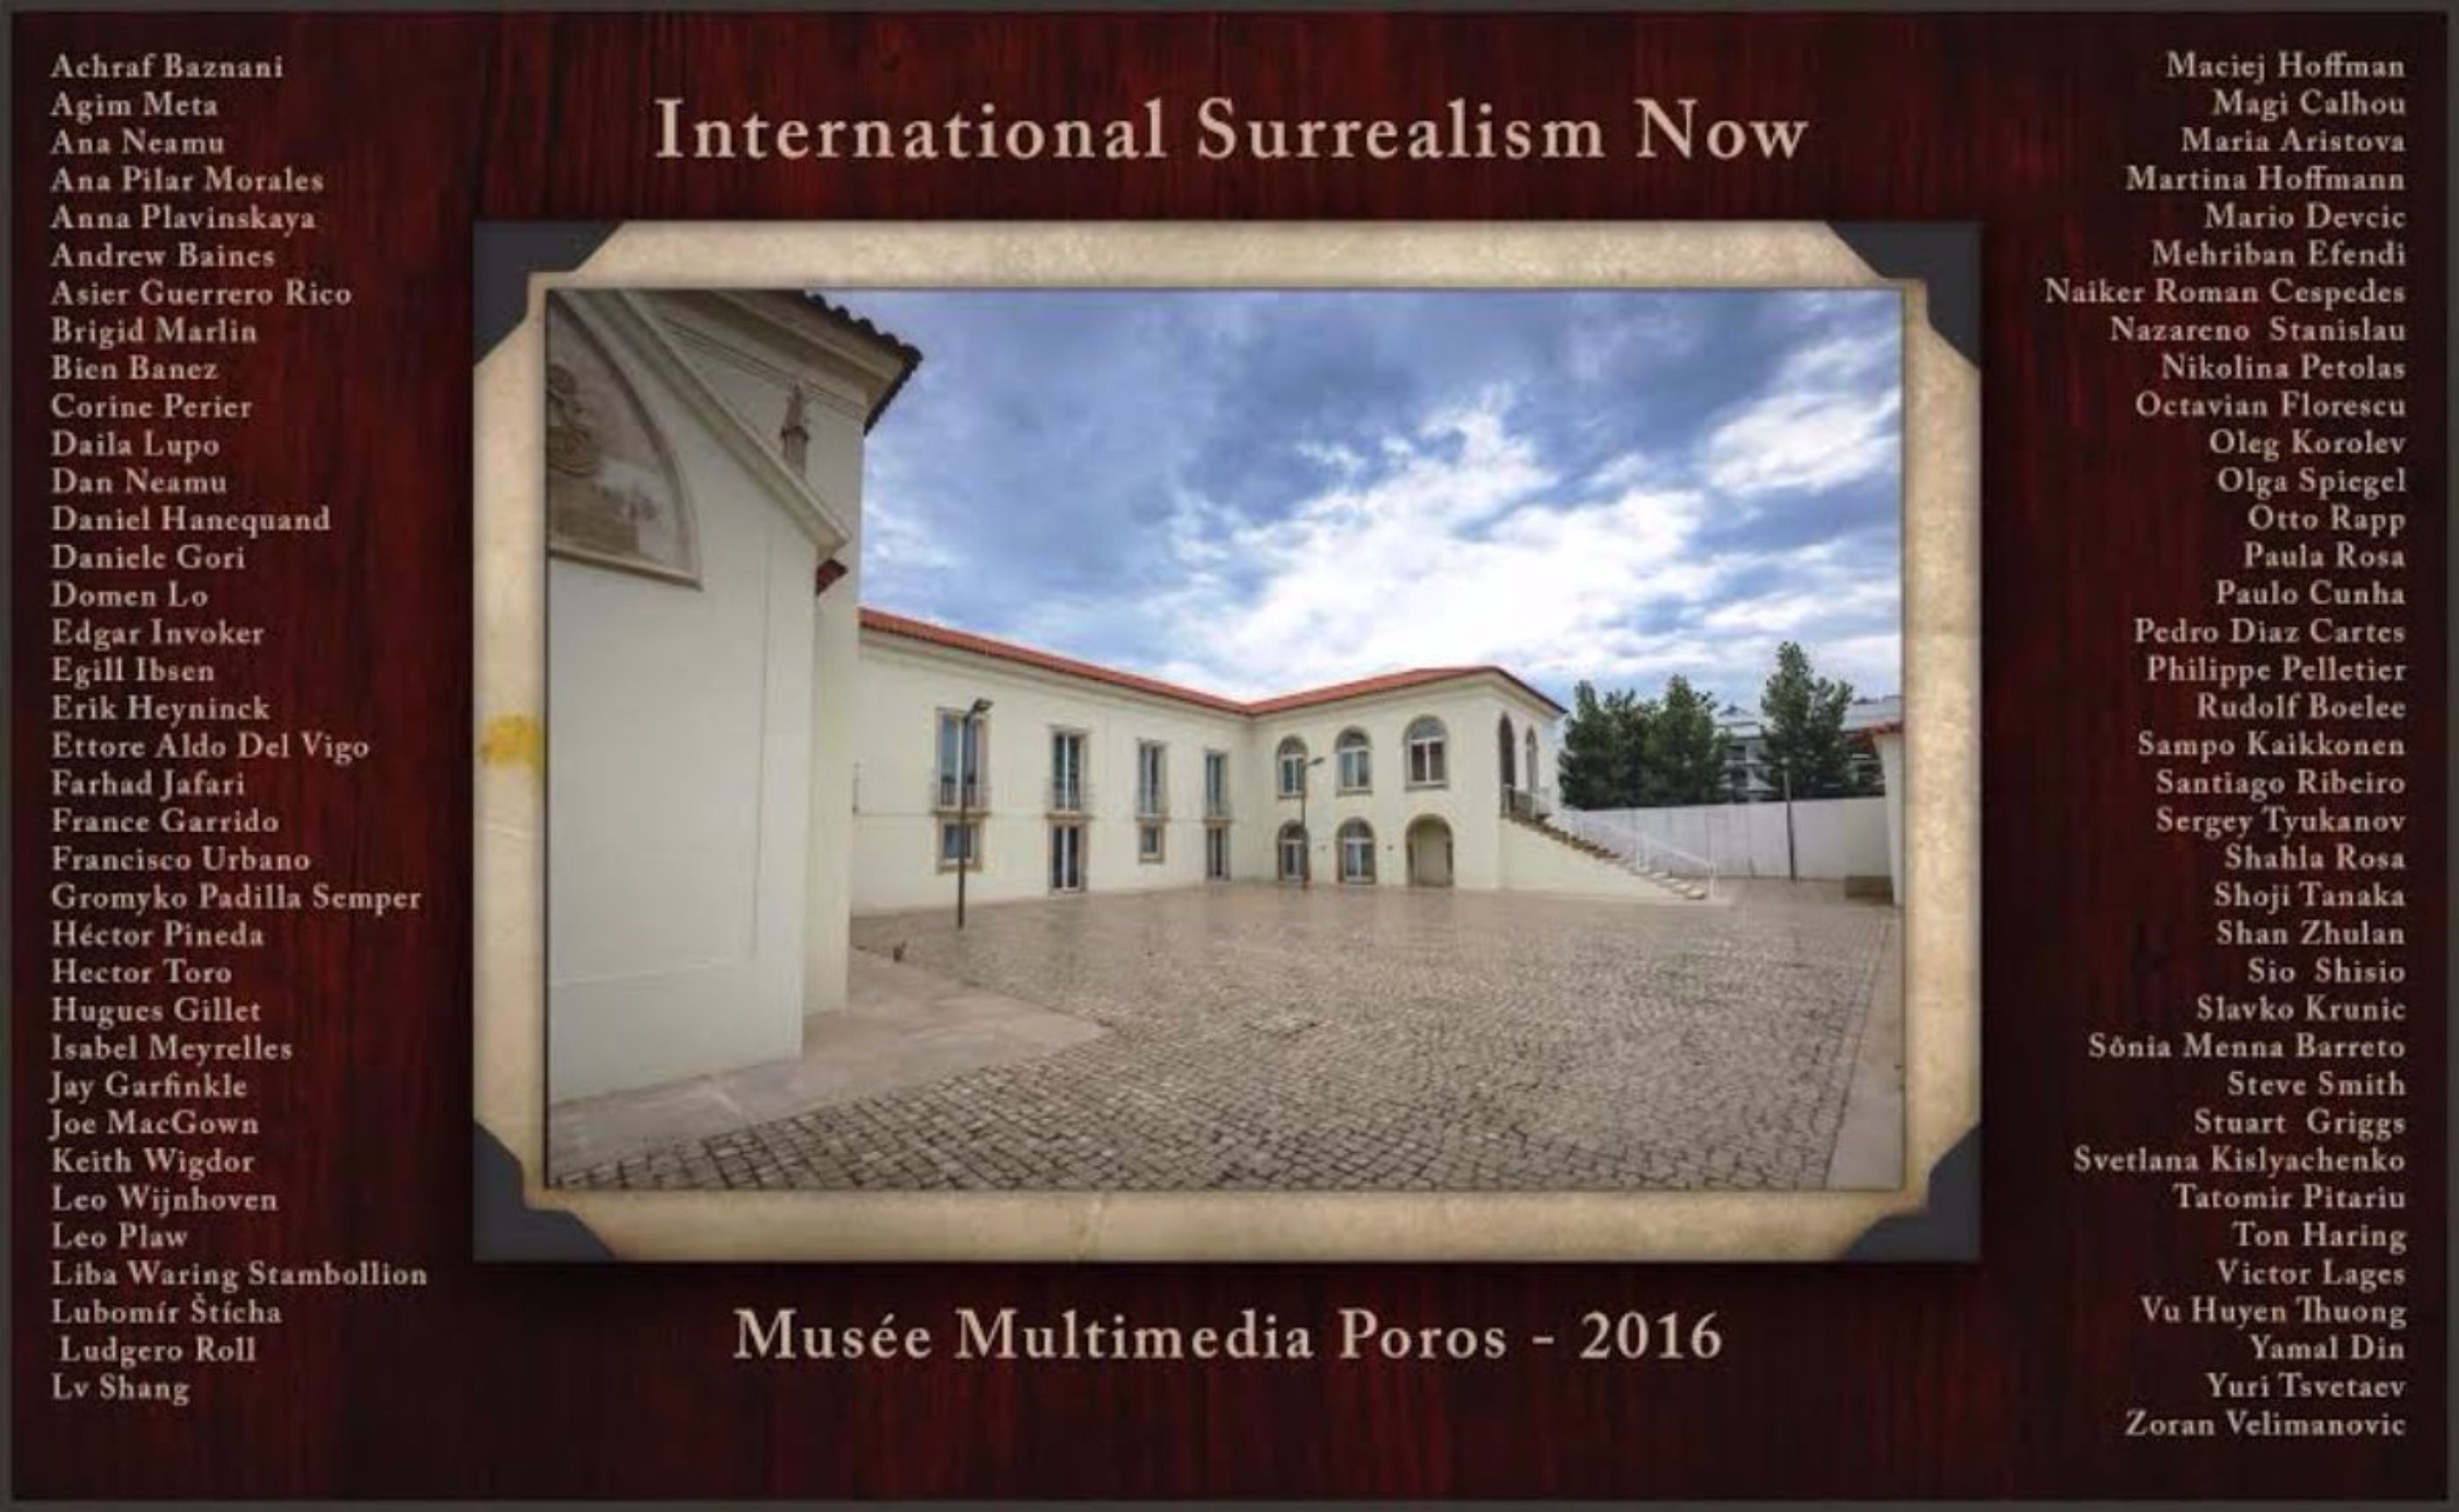 DISCOVER MULTIMEDIA P.O.R.O.S MUSEUM AND TRAVEL TO PORTUGAL WITH SURREALISM NOW